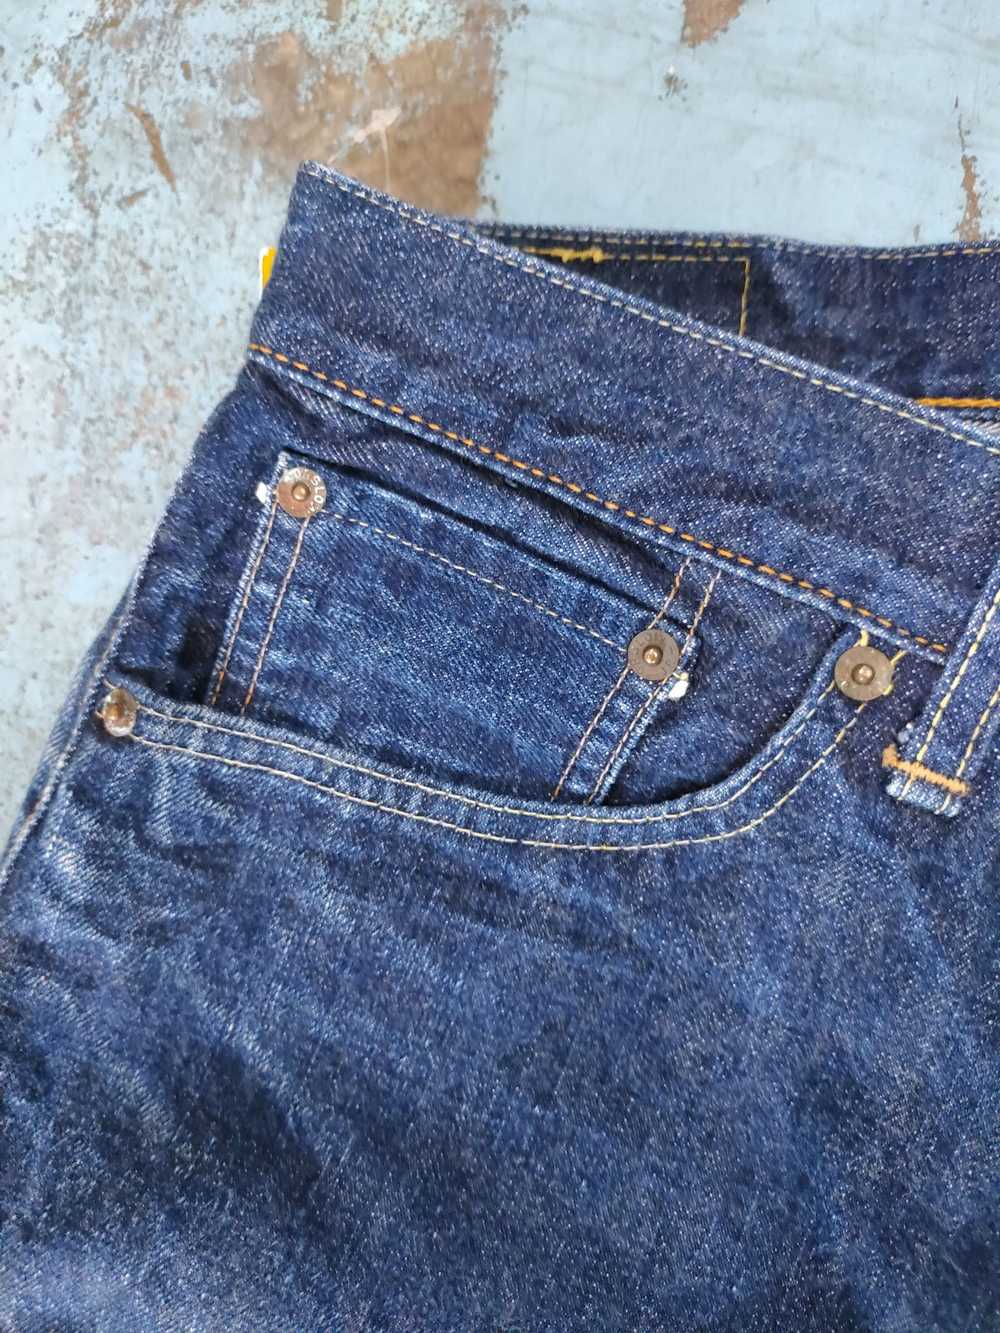 Japanese Brand Or Slow Japan Selvedge Jeans - image 12